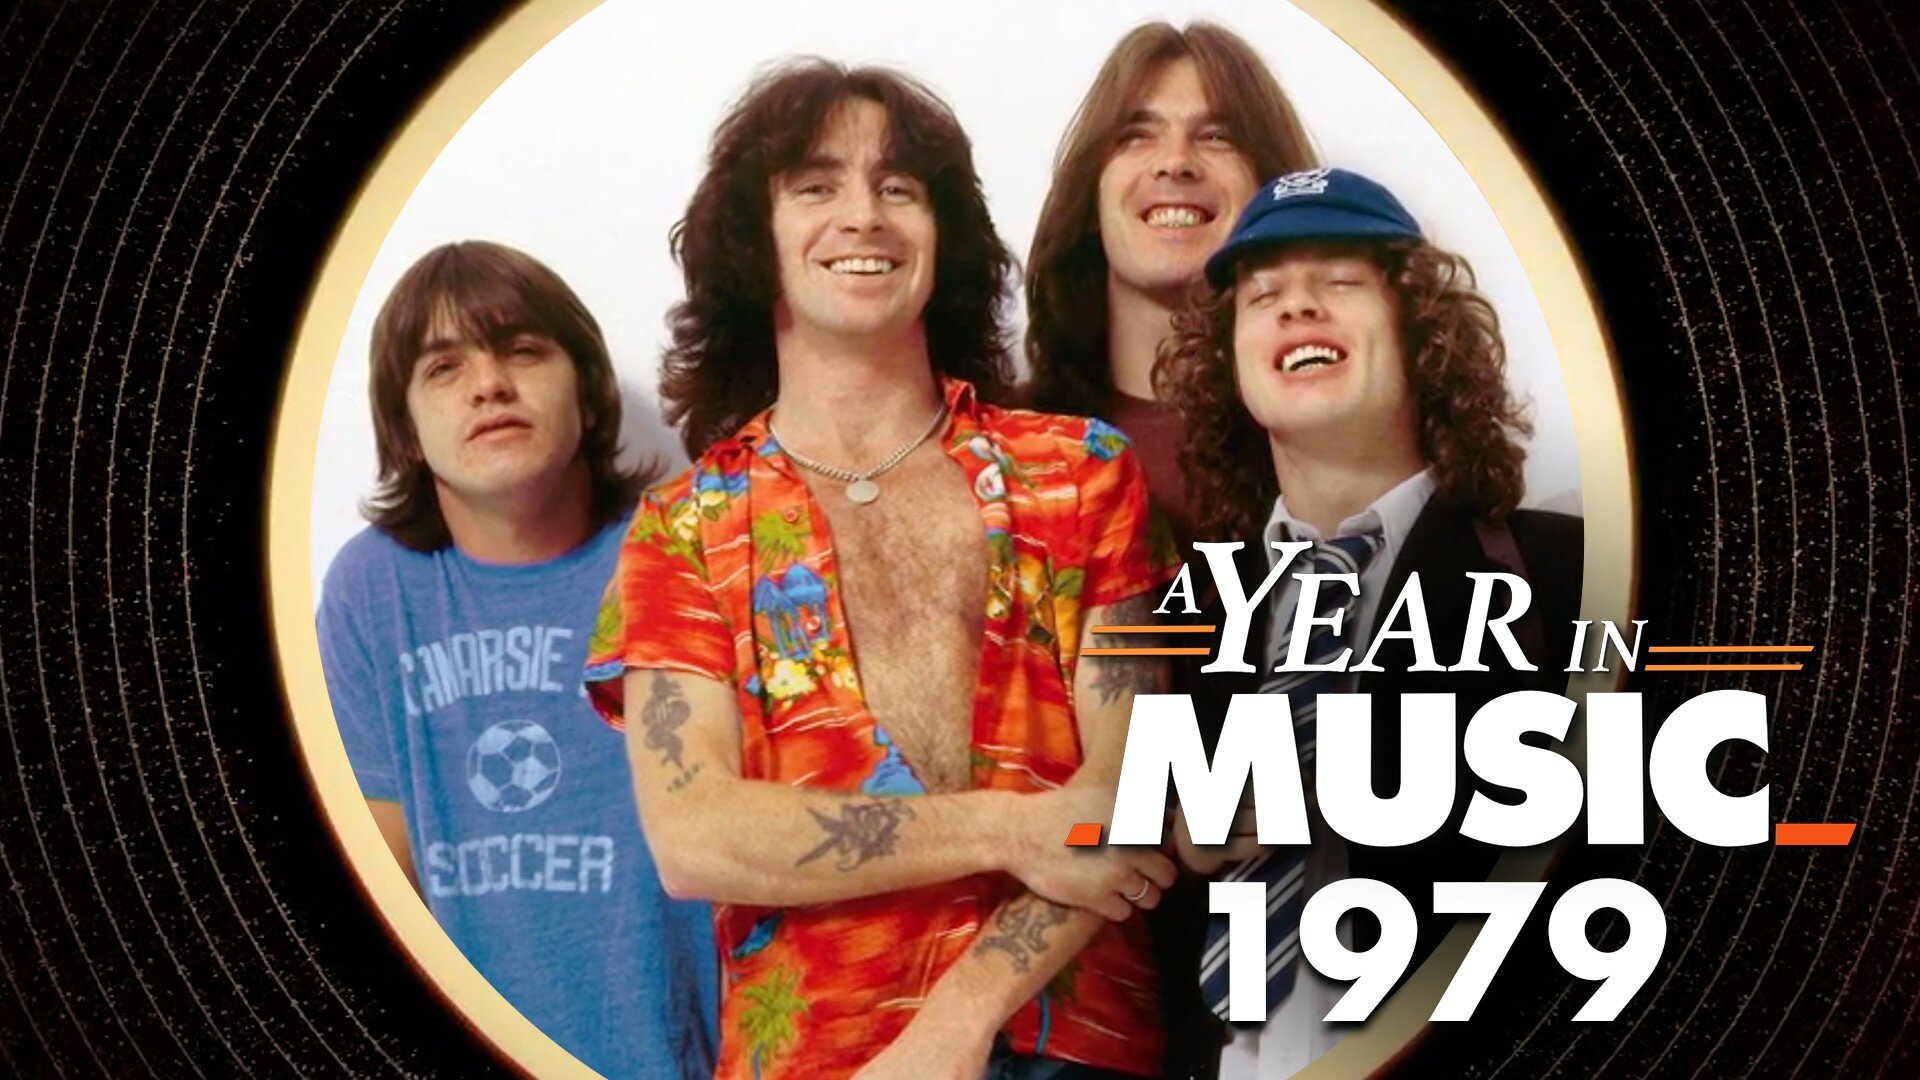 A Year in Music S2E4 1979